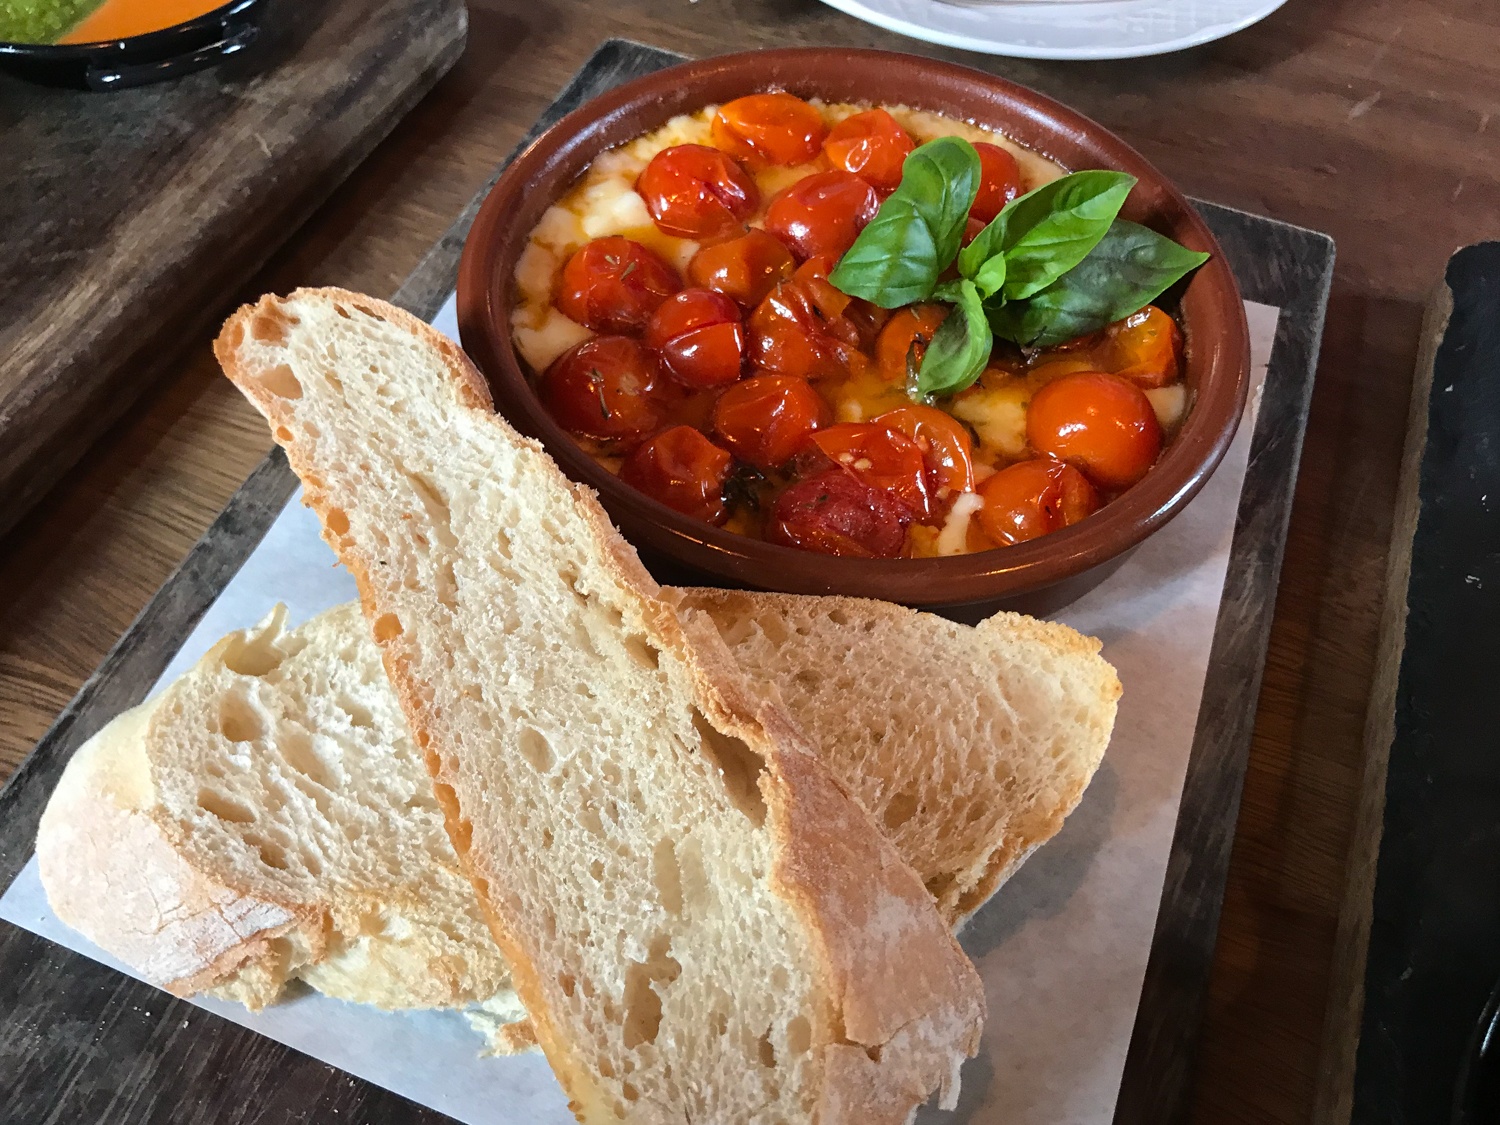 Cherry tomatoes and goats cheese at Cantina Teguise Photo Heatheronhertravels.com